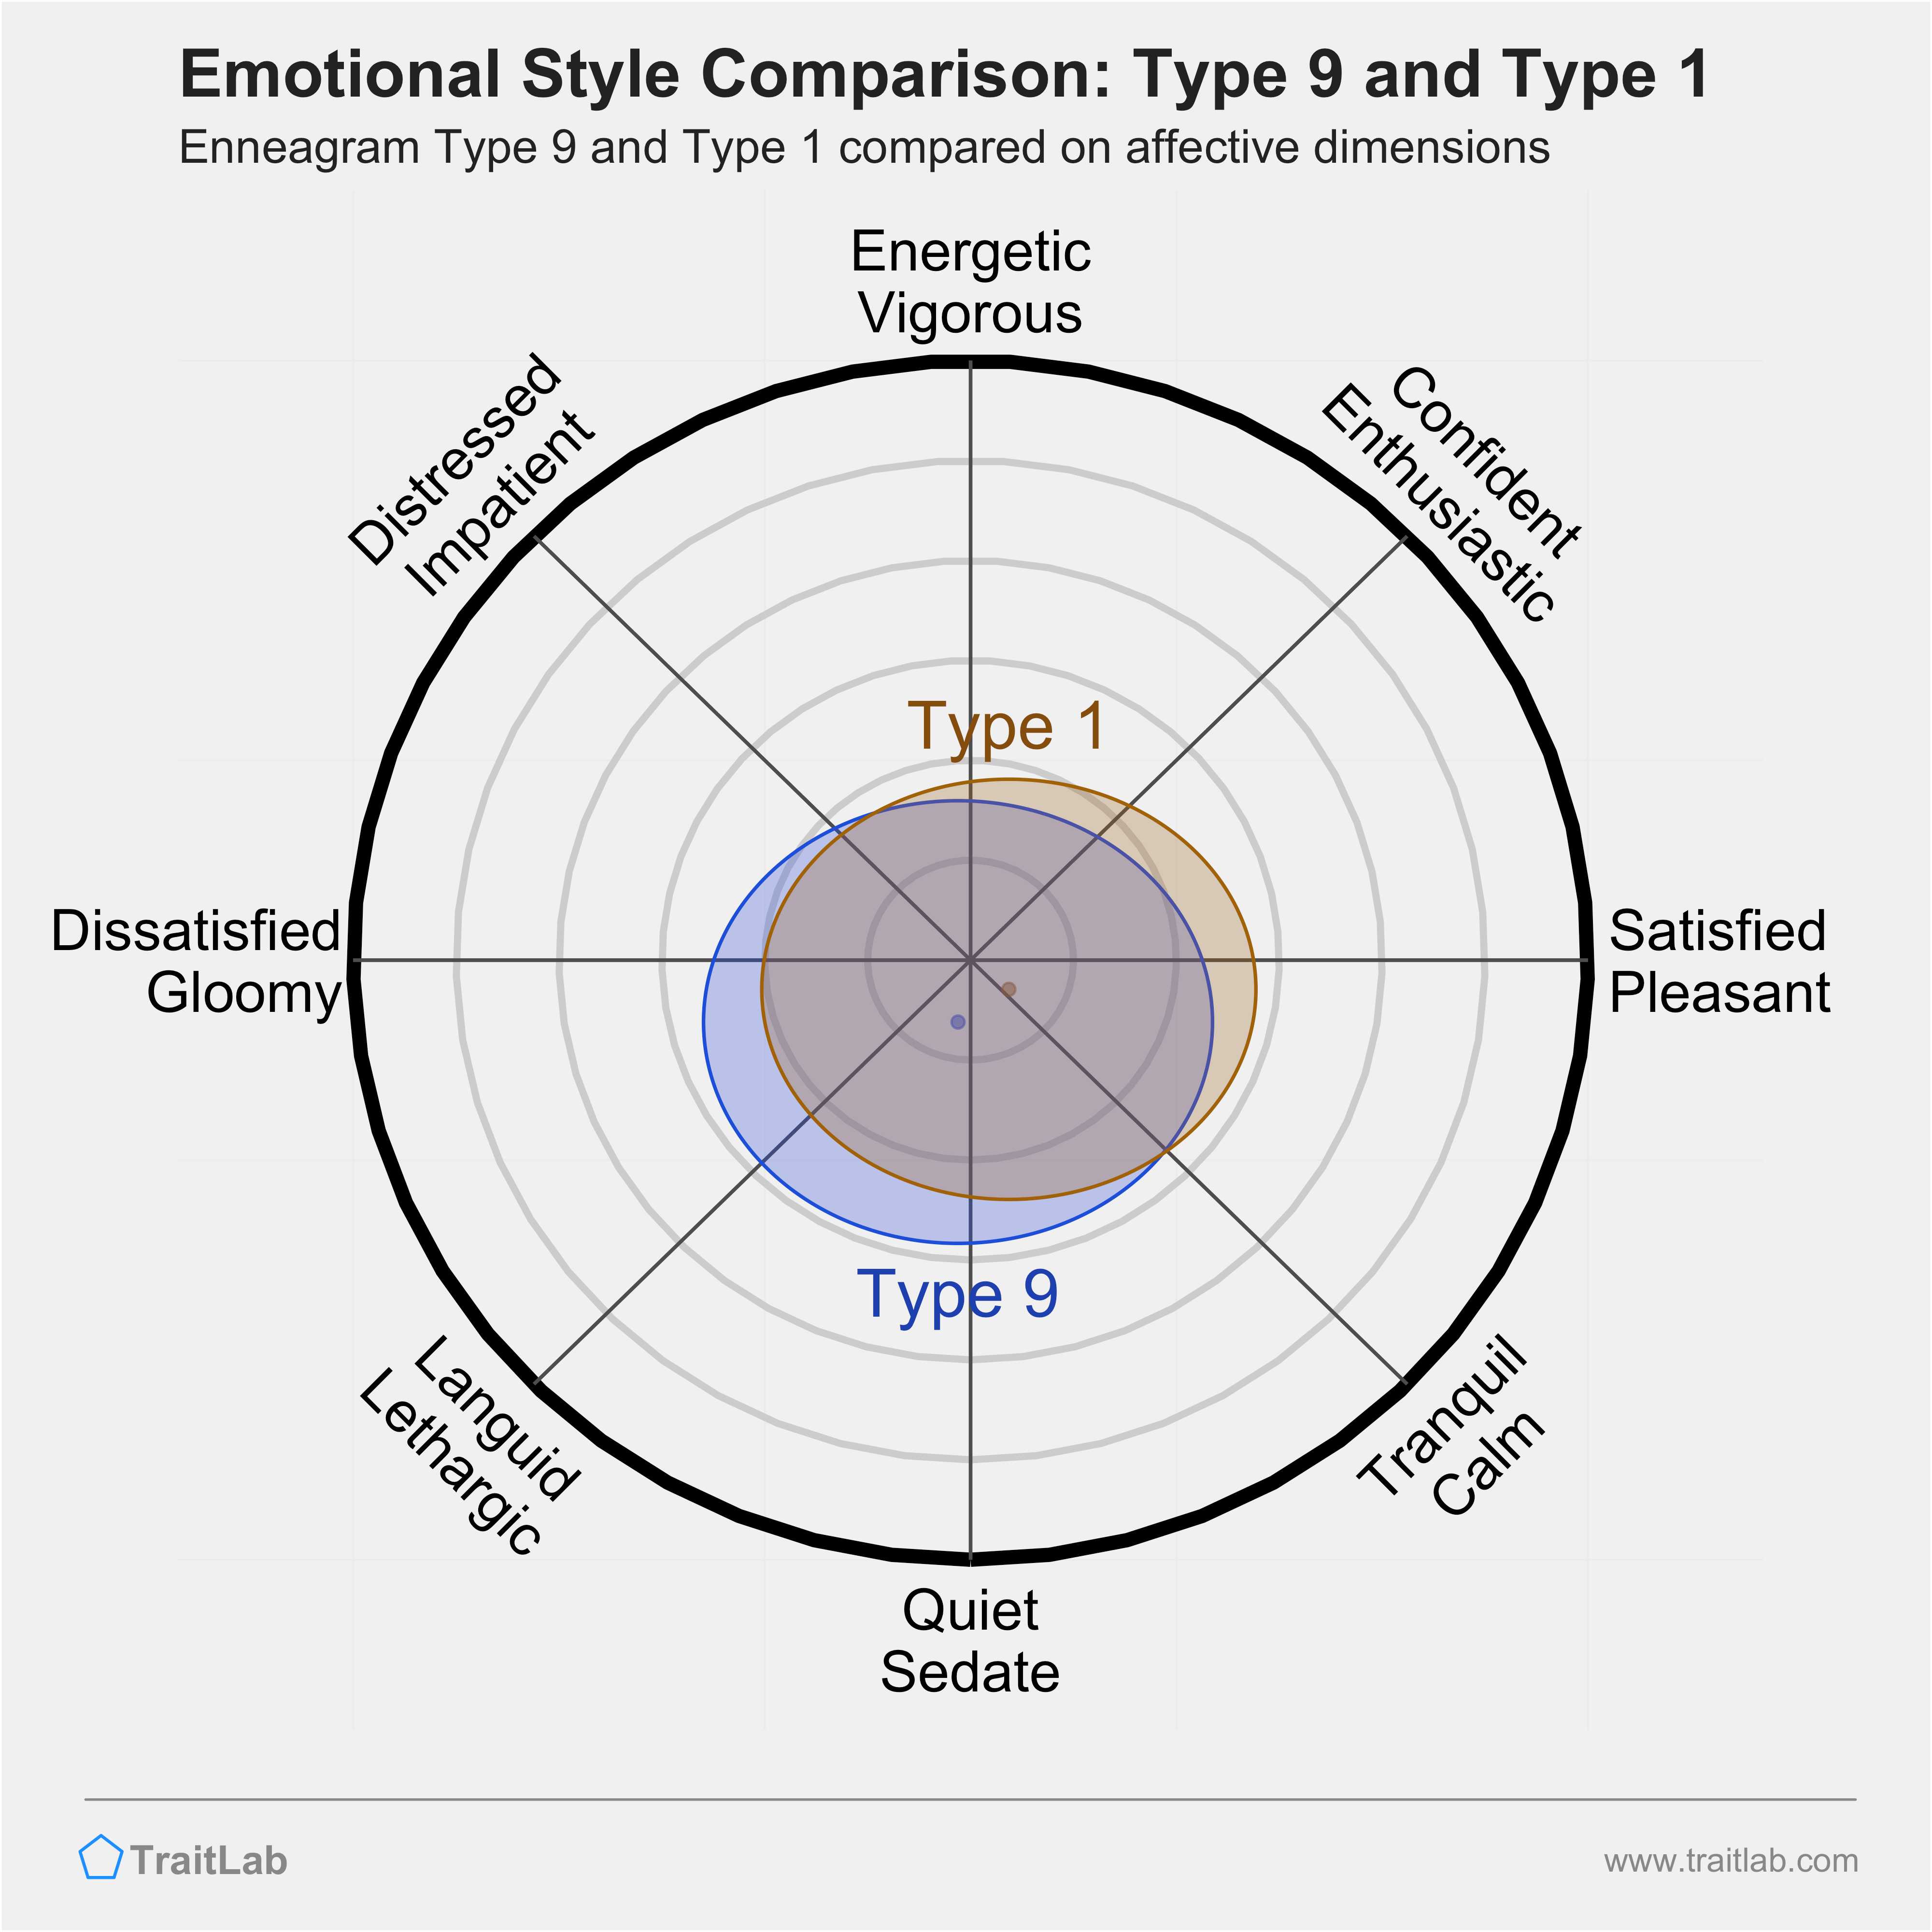 Type 9 and Type 1 comparison across emotional (affective) dimensions